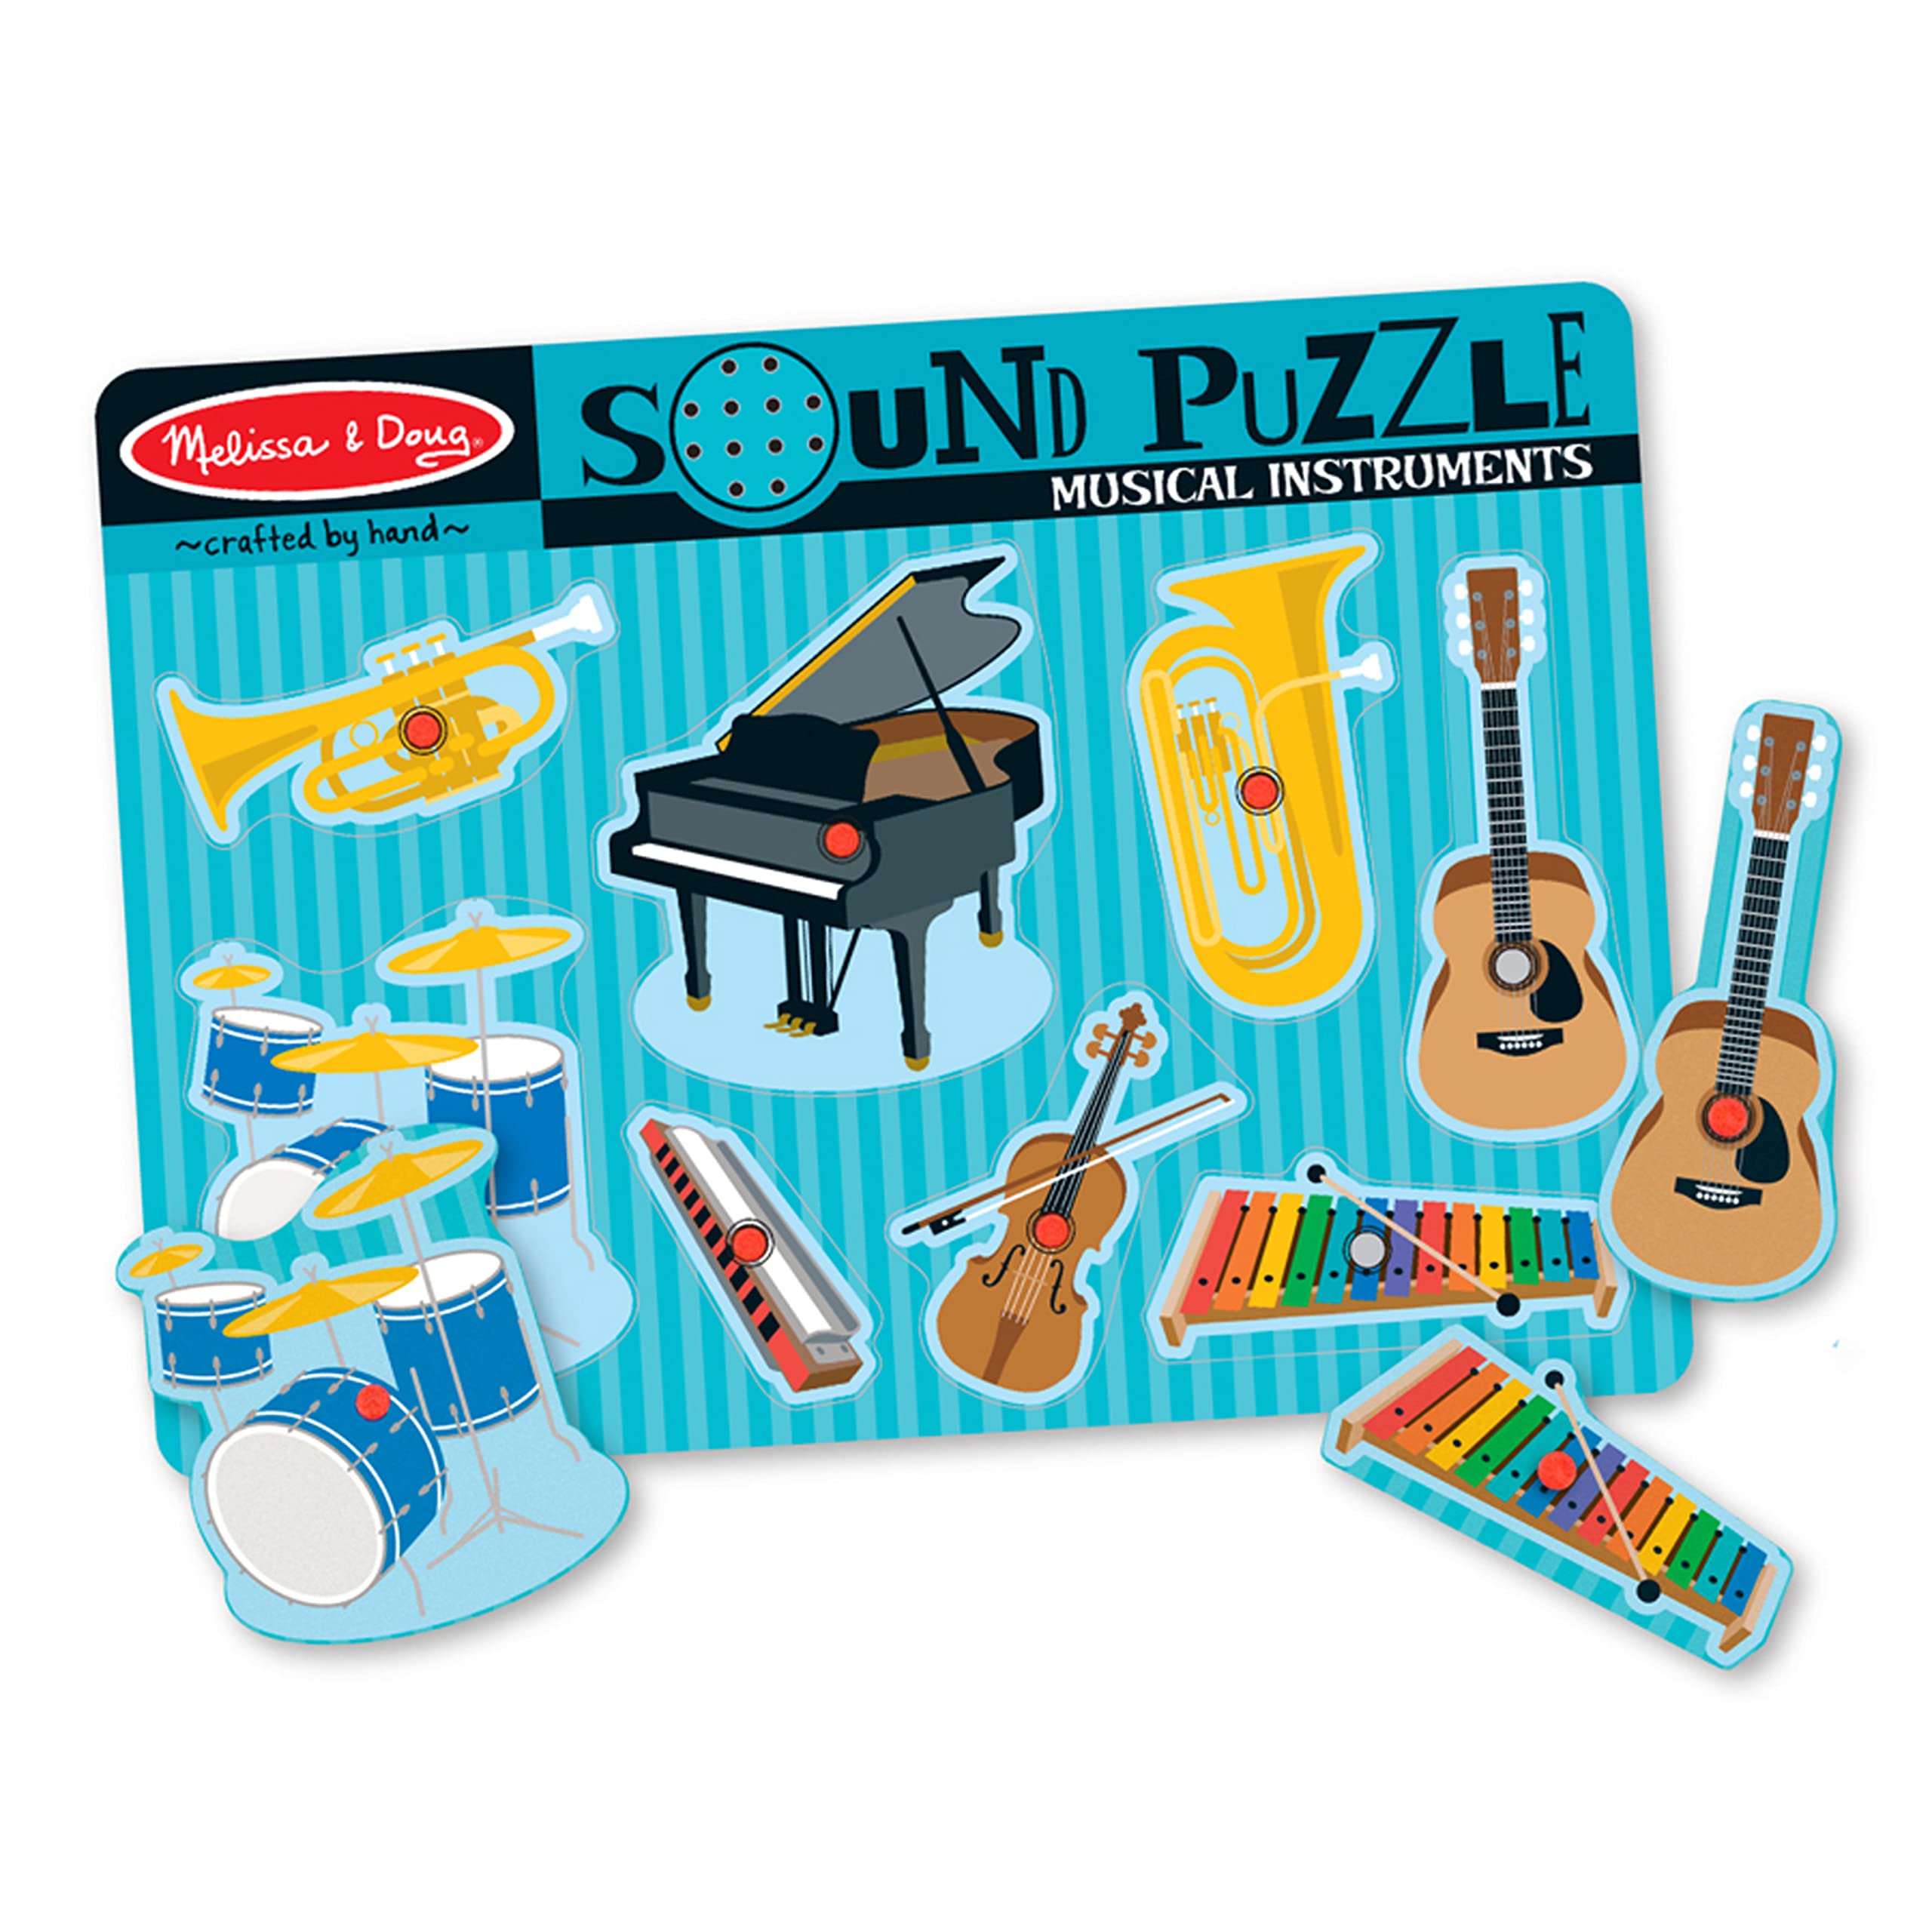 Melissa & Doug Musical Instruments Sound Puzzle - Wooden Peg Puzzle (8 pcs) - Wooden Peg Chunky Baby Puzzle, Music Learning Toys, Musical Sound Puzzles For Toddlers And Preschoolers Ages 2+